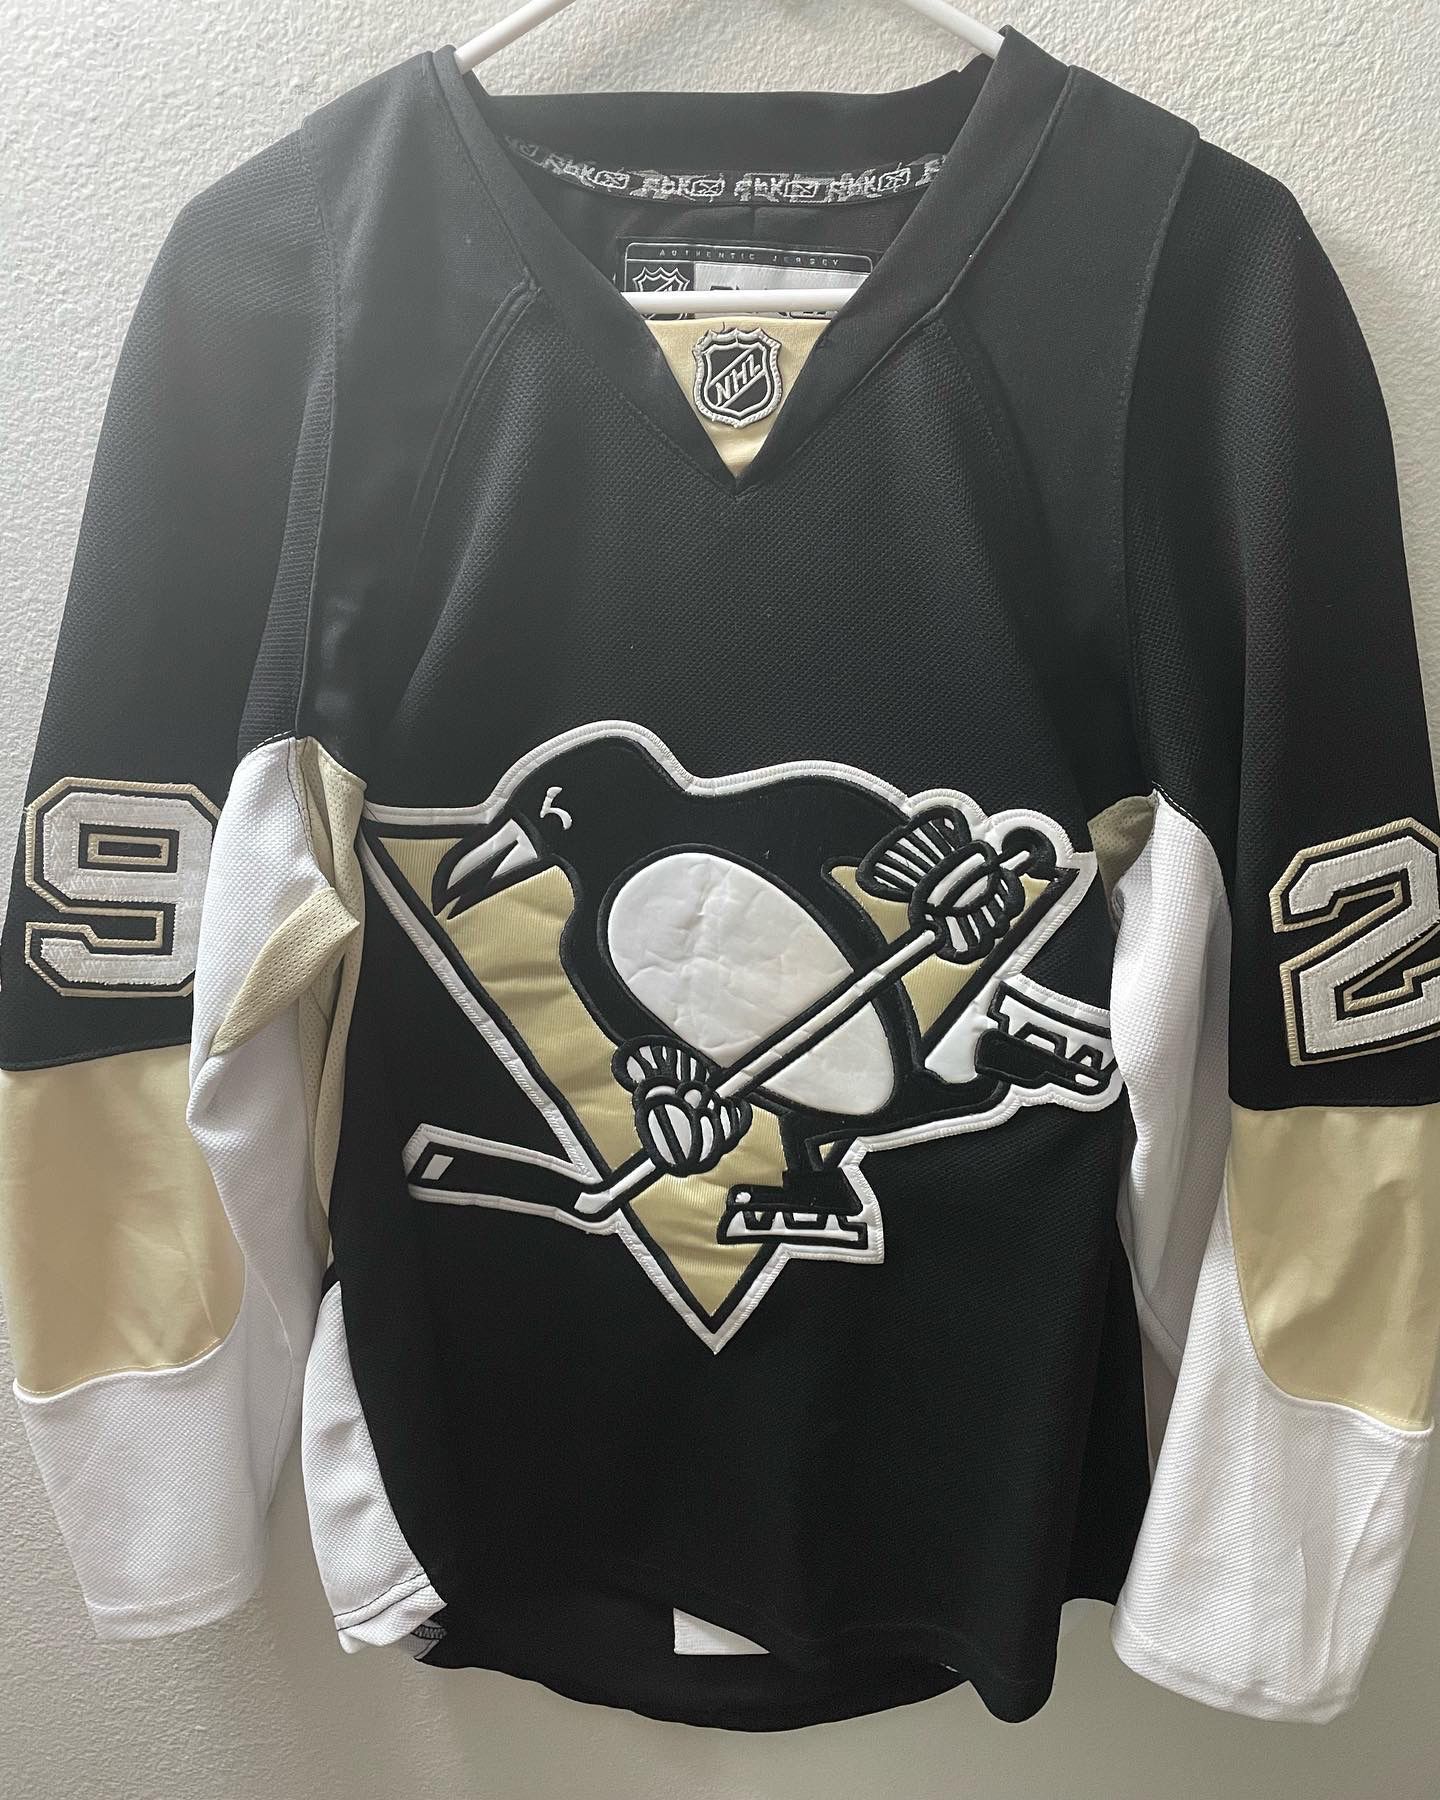 Marc Andre Fleury Jersey for sale